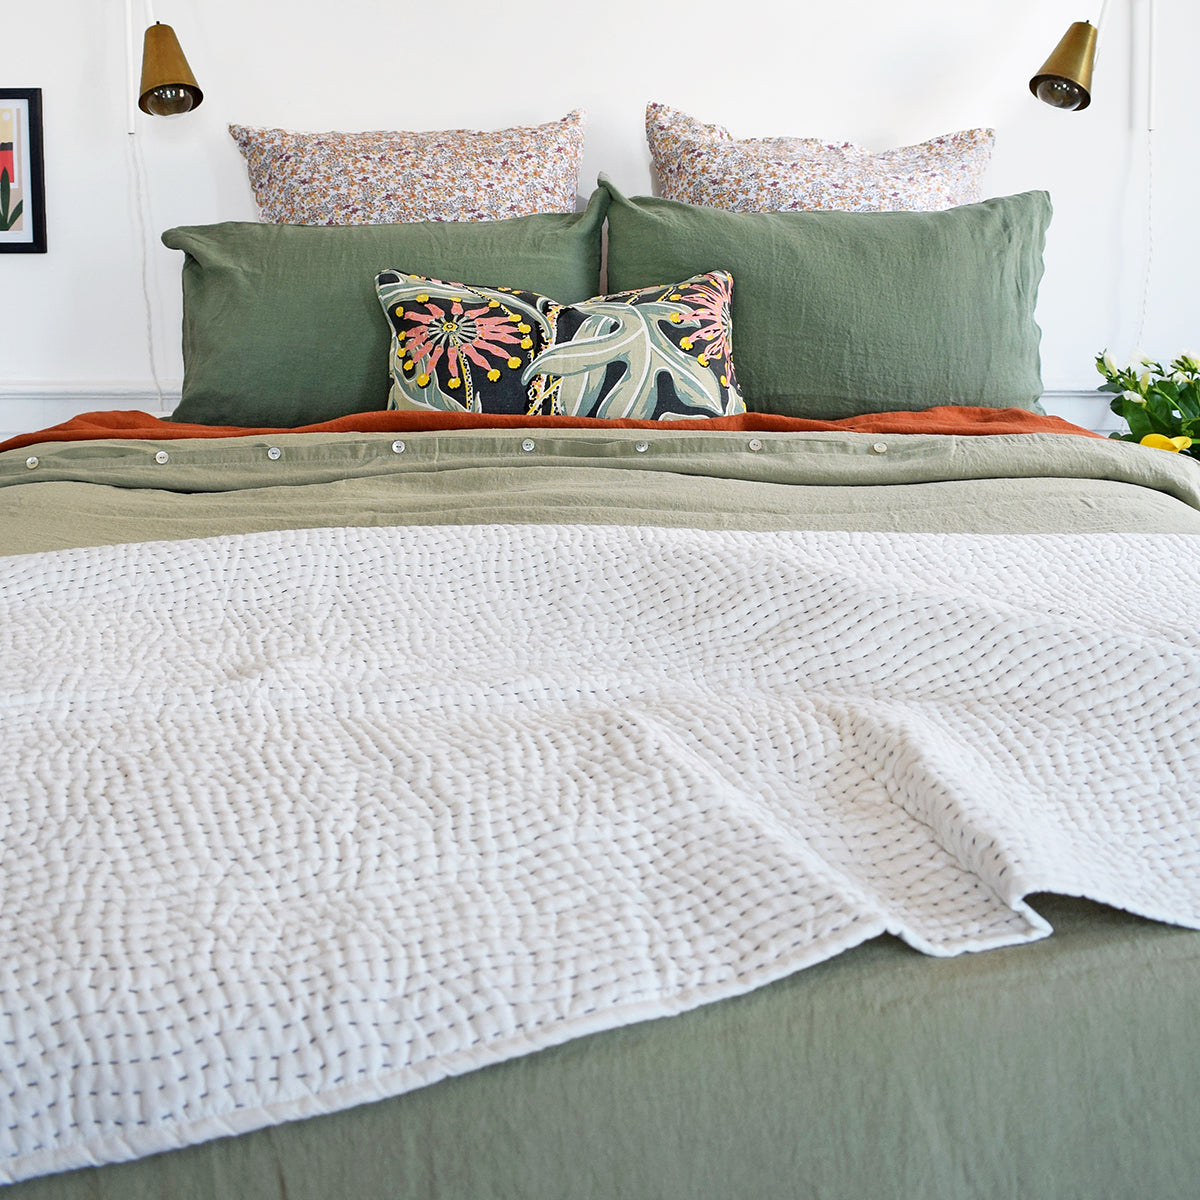 Linge Particulier Jade Green Standard Linen Pillowcase Sham with a fennel green linen duvet and green Utopia Goods pillow for a colorful linen bedding look in camo green - Collyer's Mansion